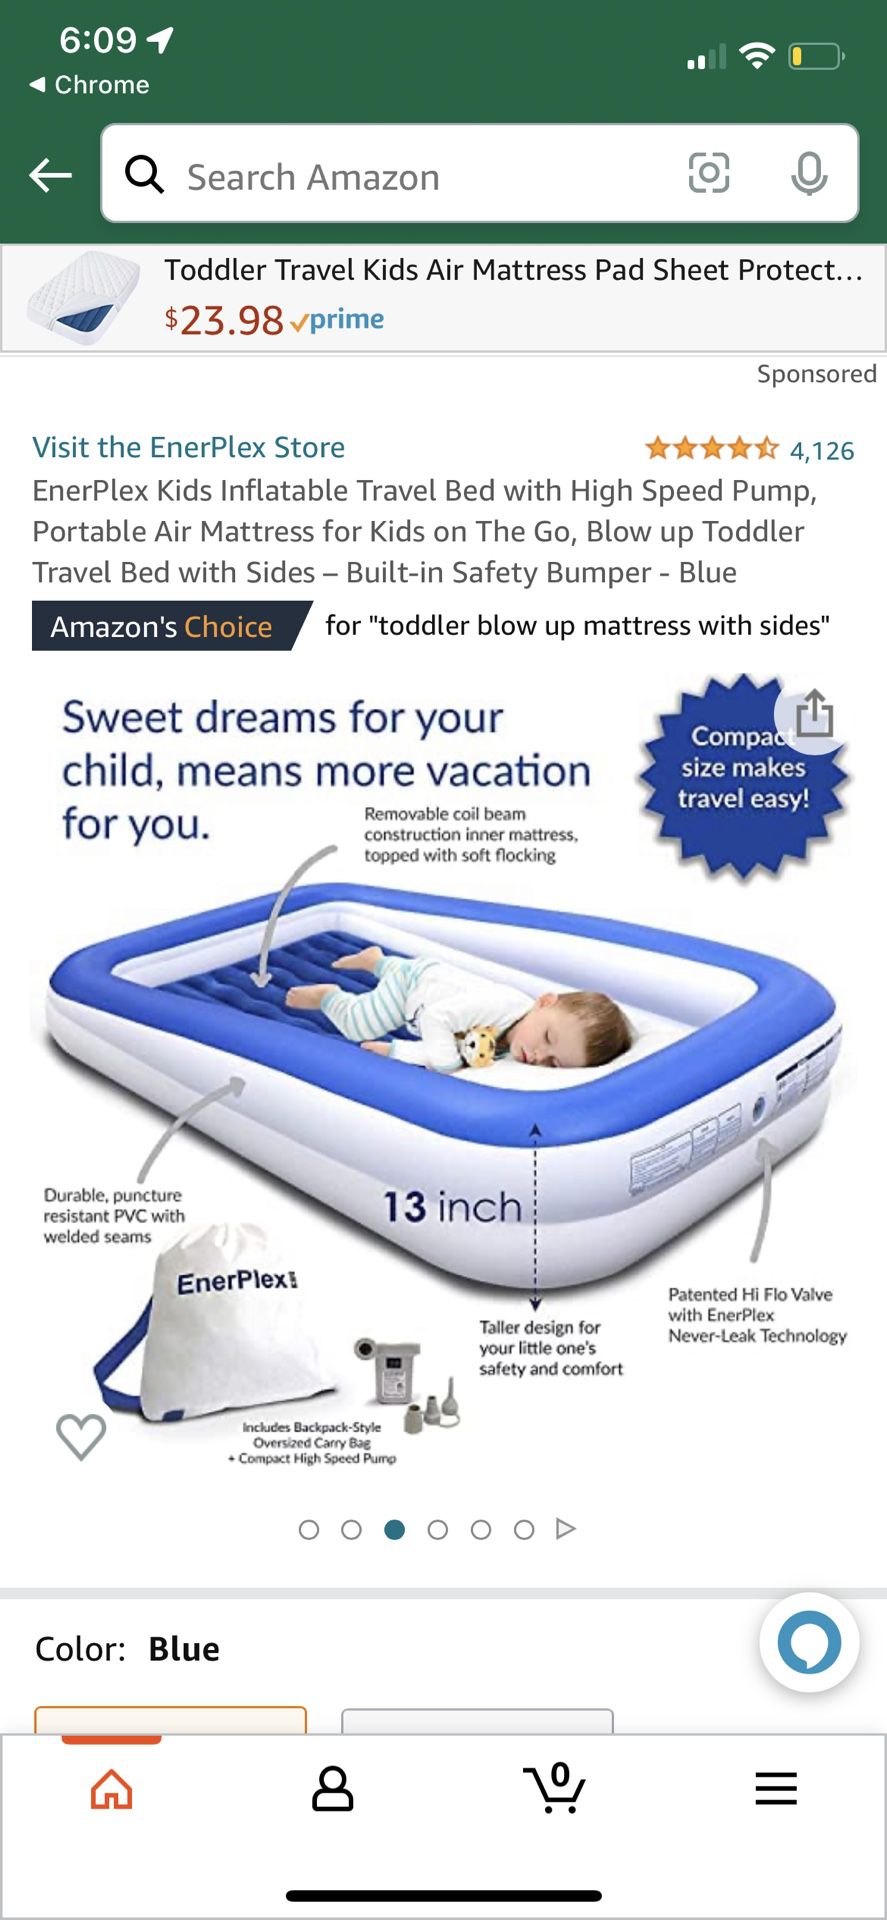 EnerPlex Kids Inflatable Travel Bed with High Speed Pump, Portable Air Mattress for Kids on The Go, Blow up Toddler Travel Bed with Sides – Built-in S